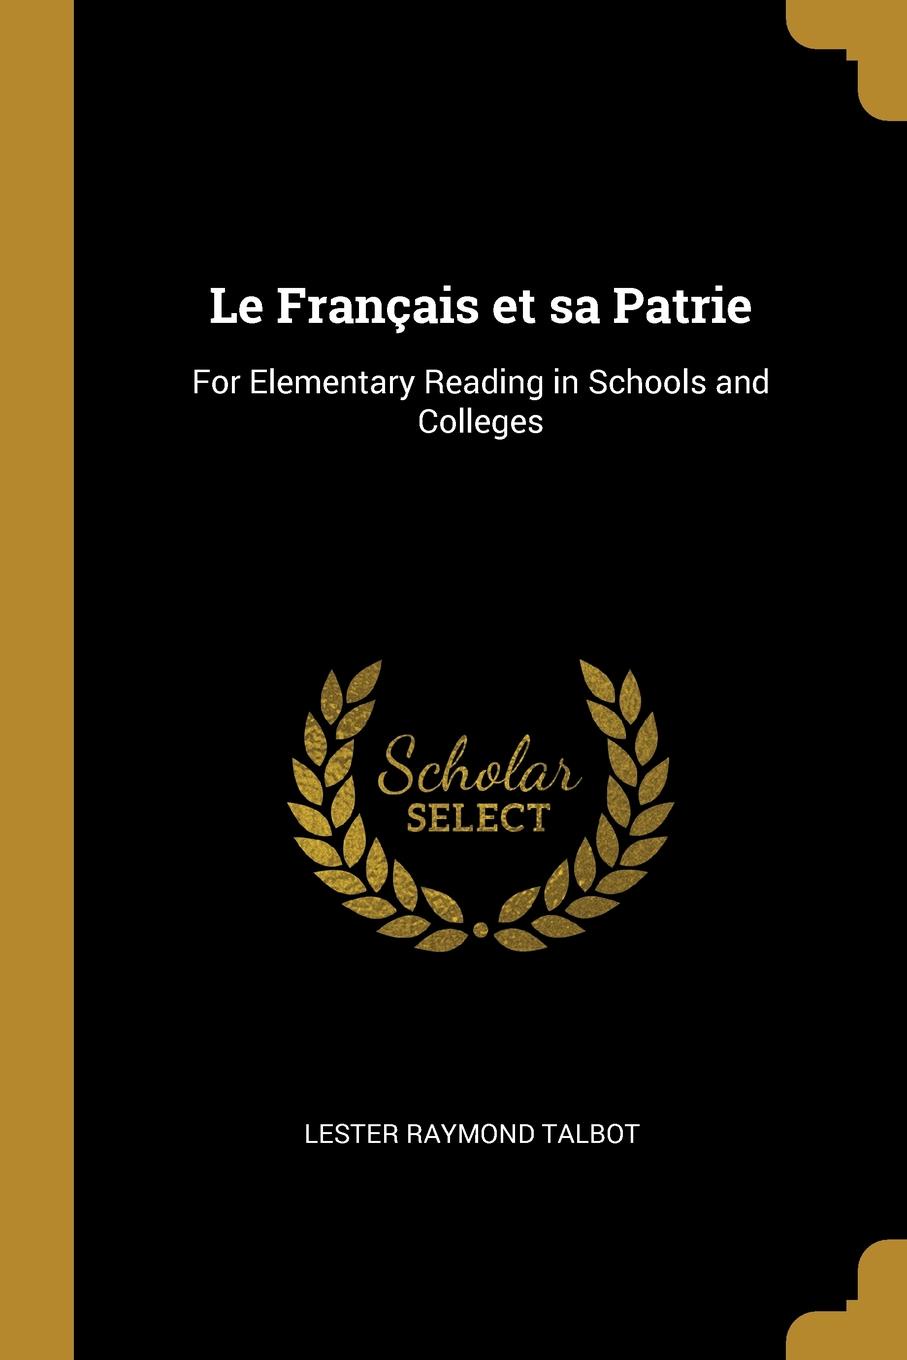 Le Francais et sa Patrie. For Elementary Reading in Schools and Colleges